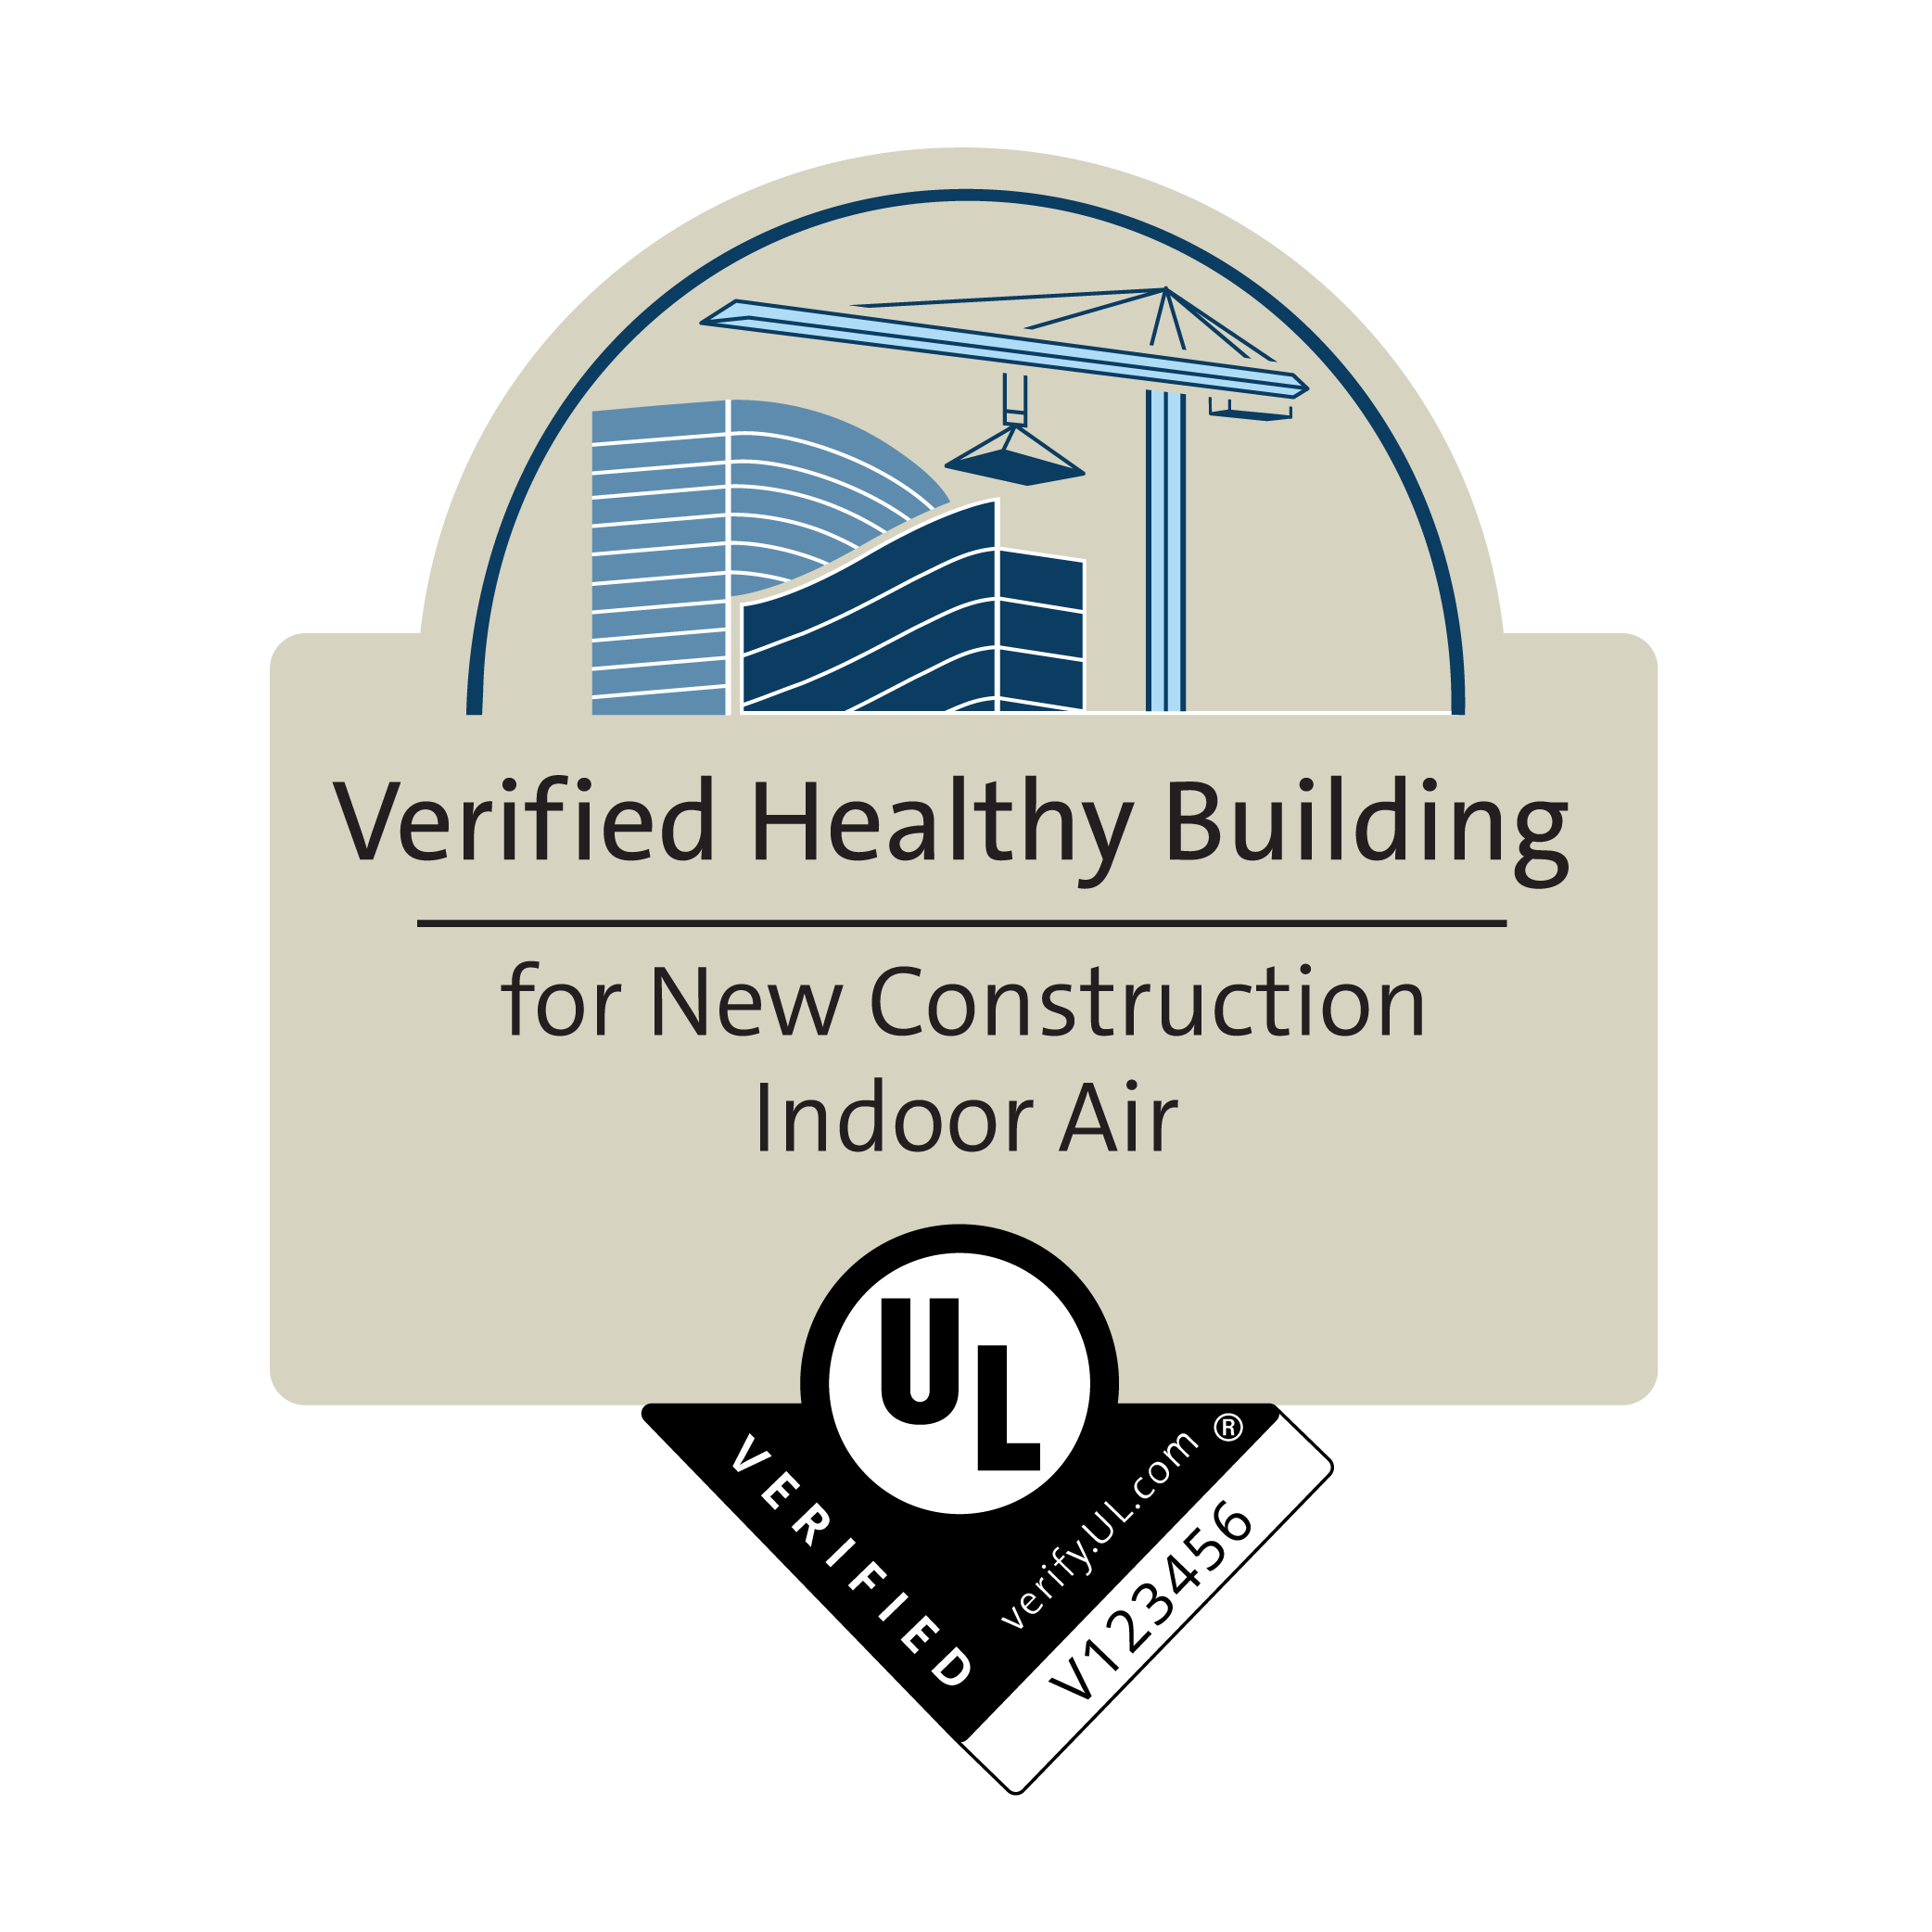 UL Verified Healthy Building for New Construction Indoor Air Verification Mark